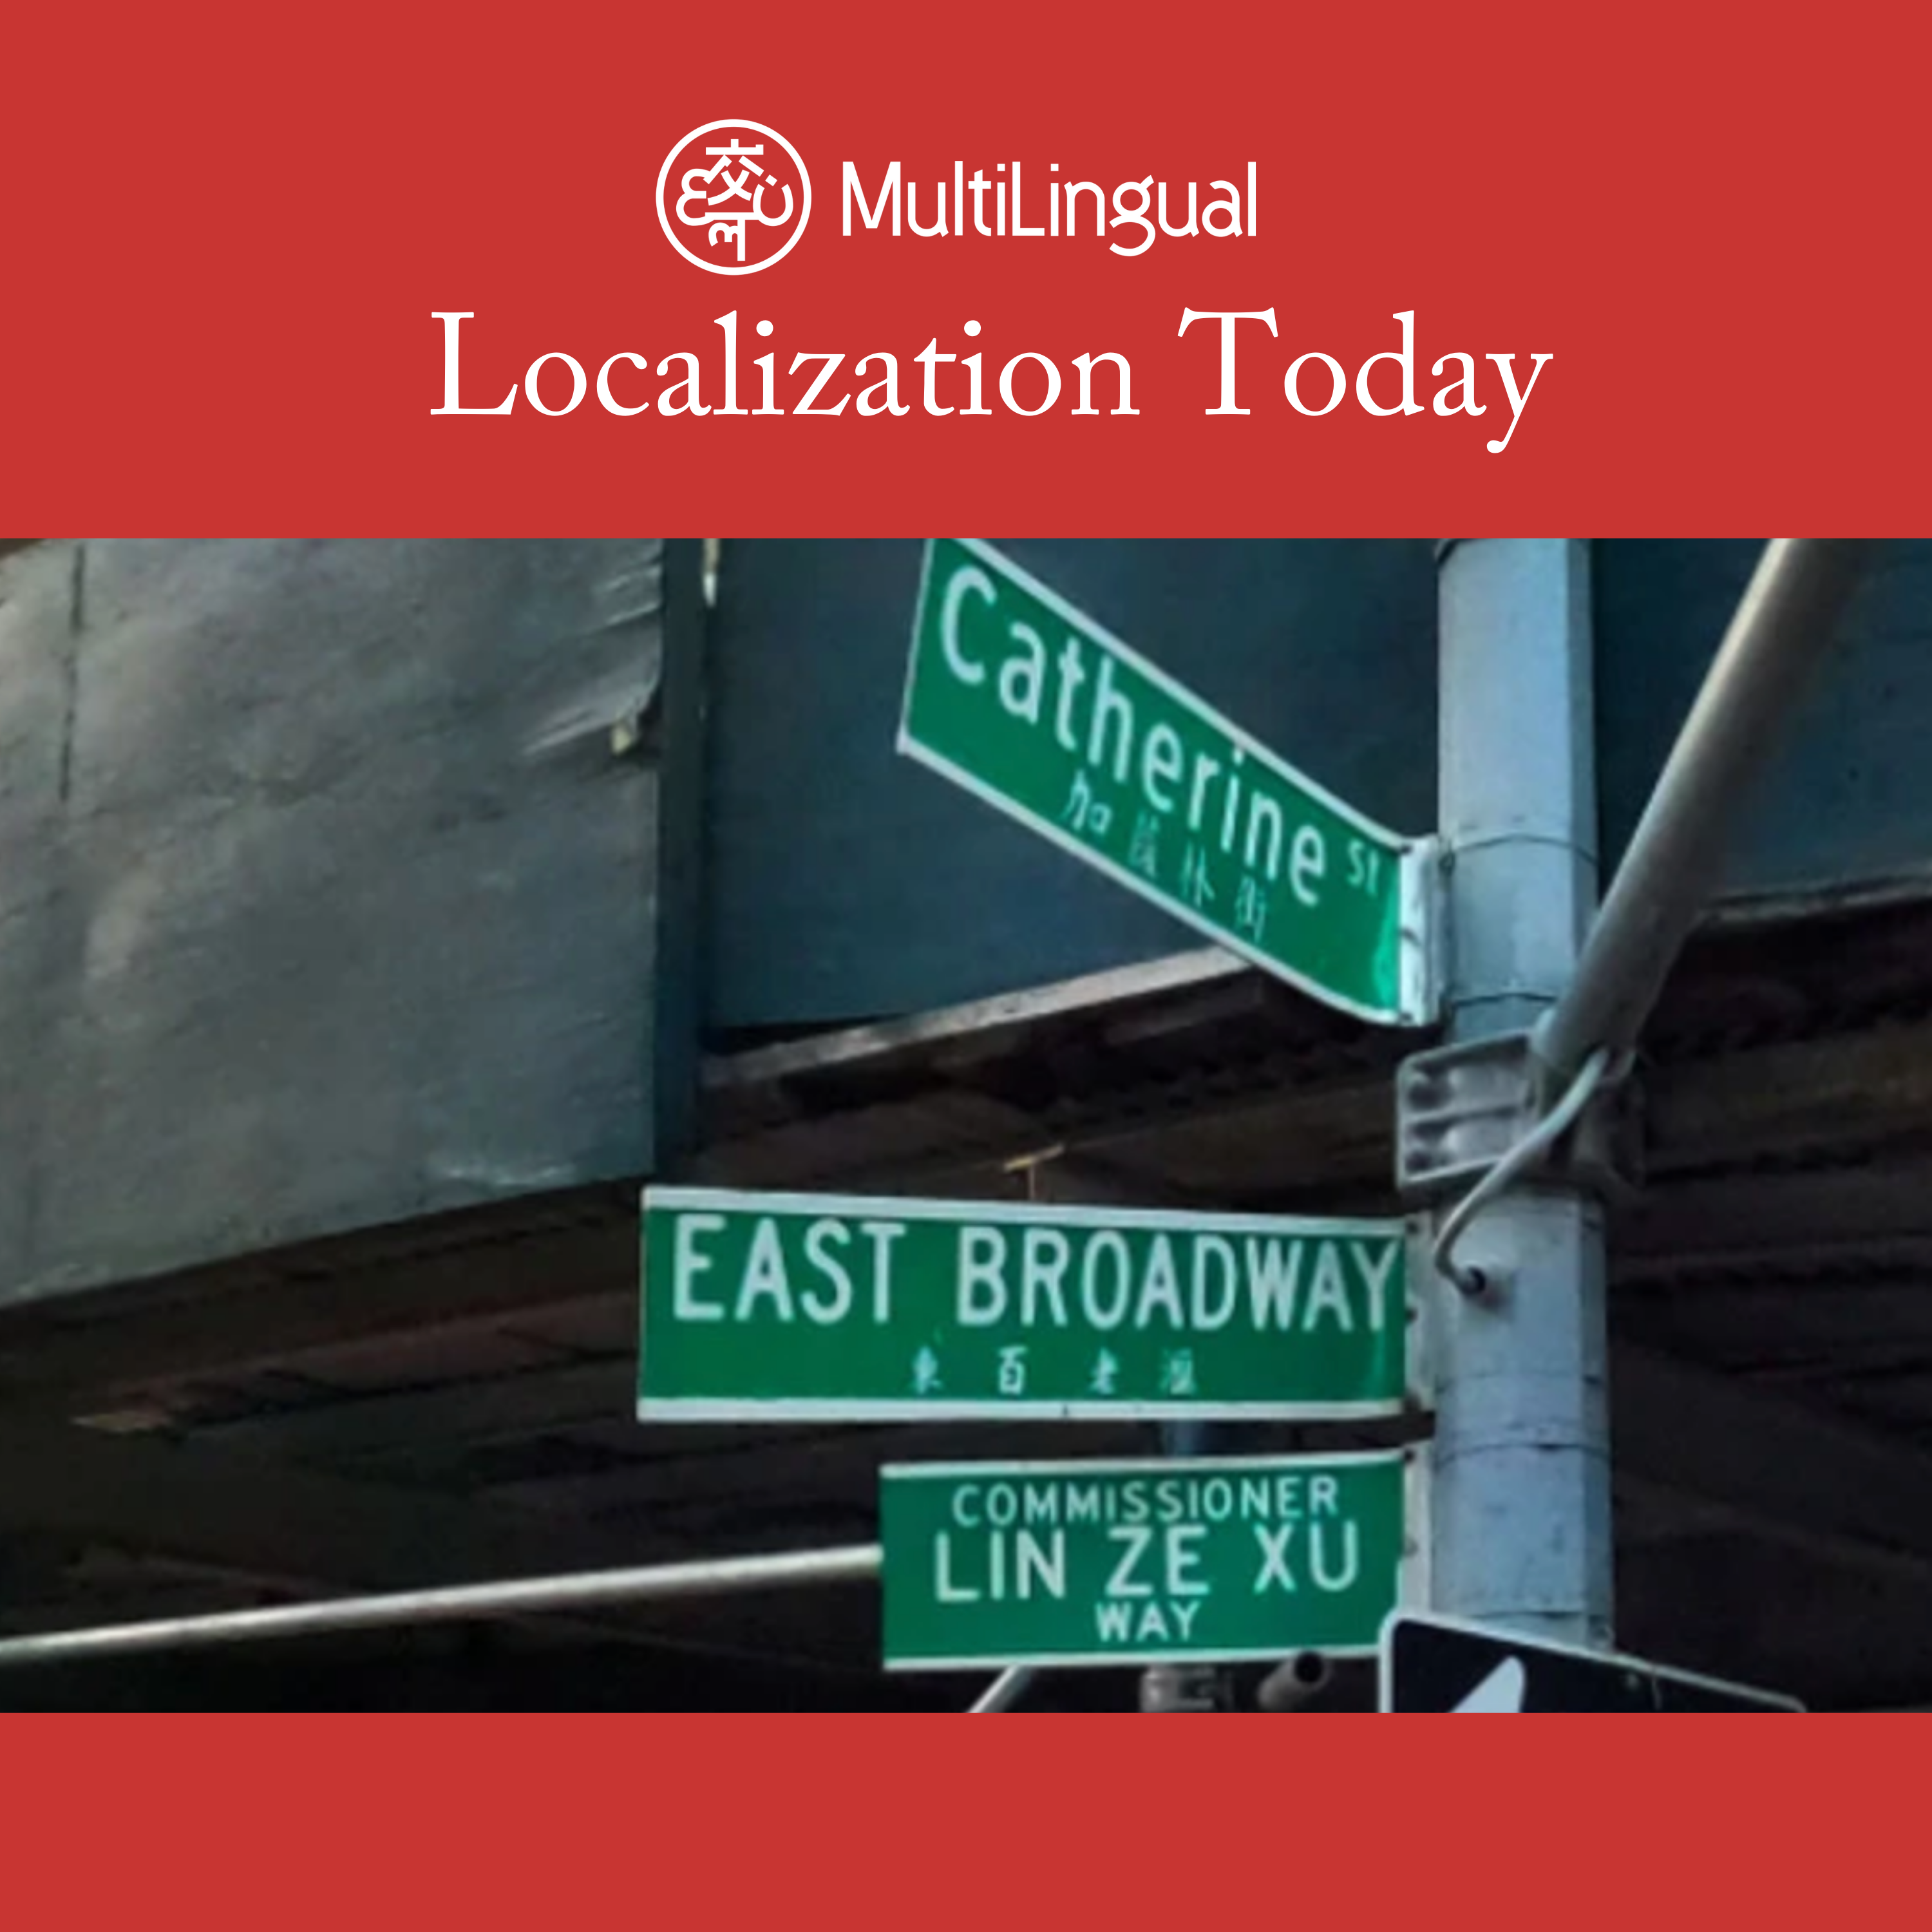 Bill supports New York City Chinatown’s English-Chinese street signs